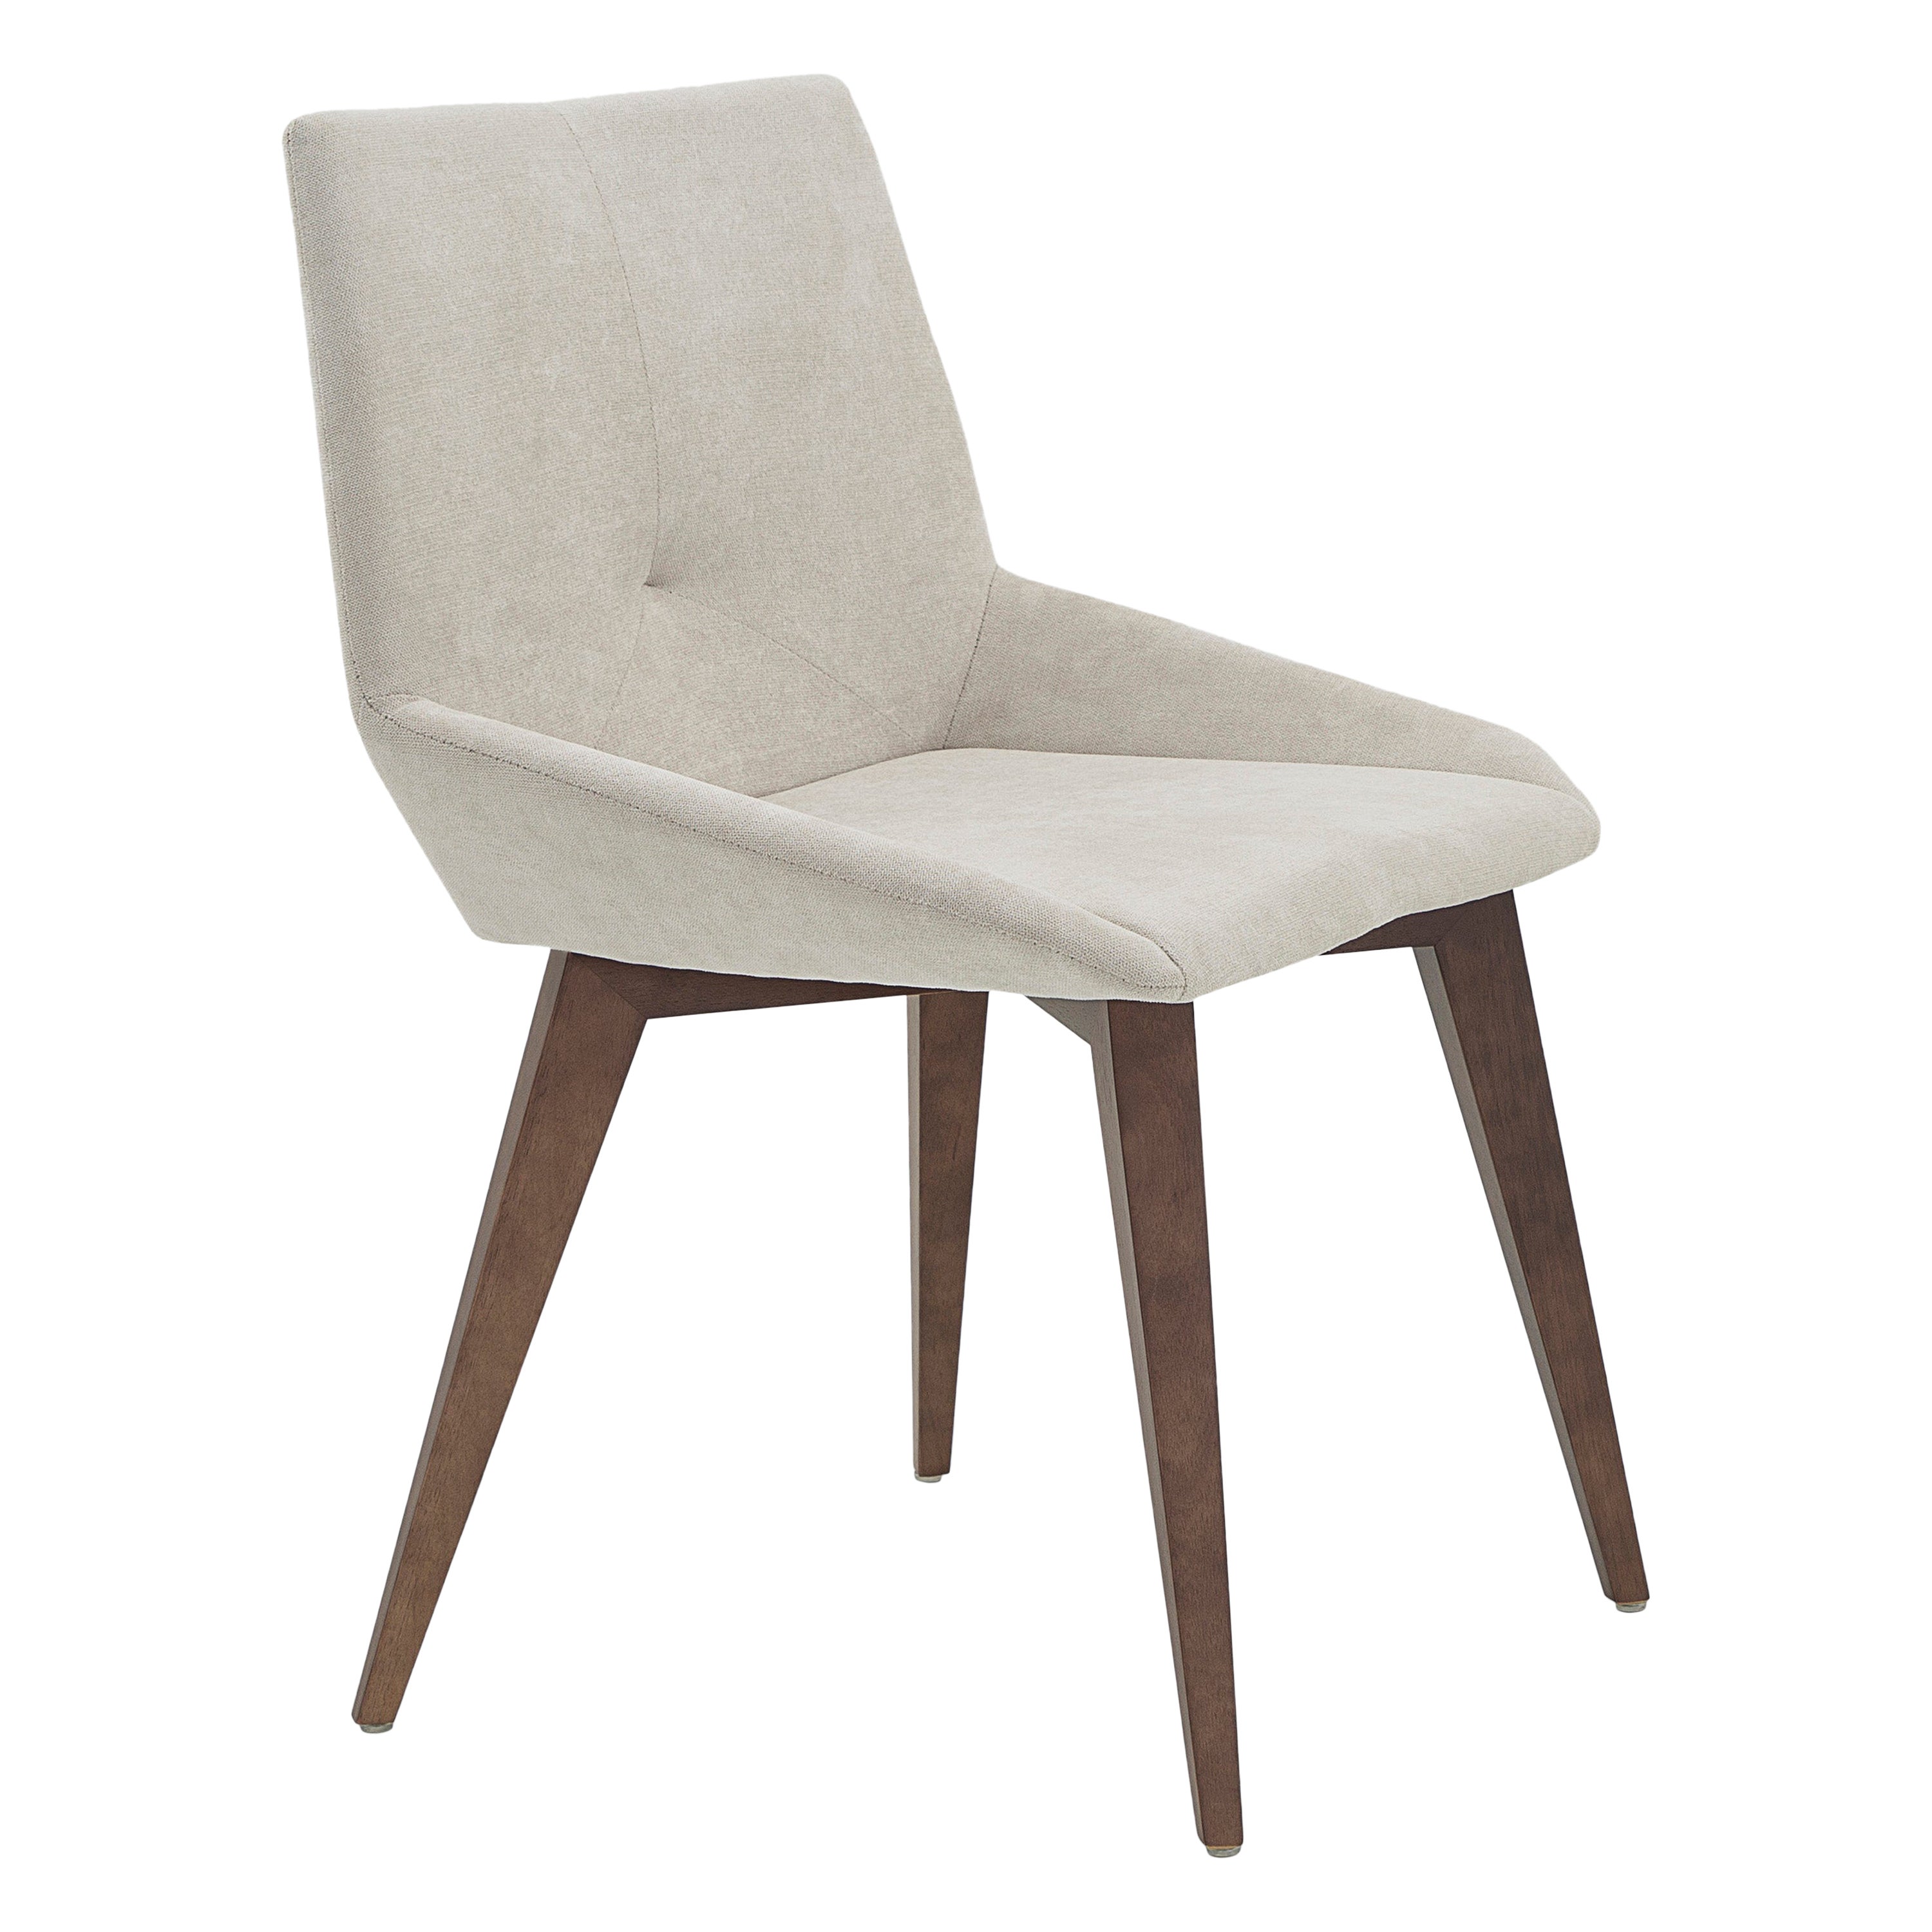 The Geometric dining chair as the name says has geometric shapes and pure lines with its walnut wooden legs with the seat all wrapped in a beautiful and soft light gray fabric. All of these small details thought by architects and designers by our